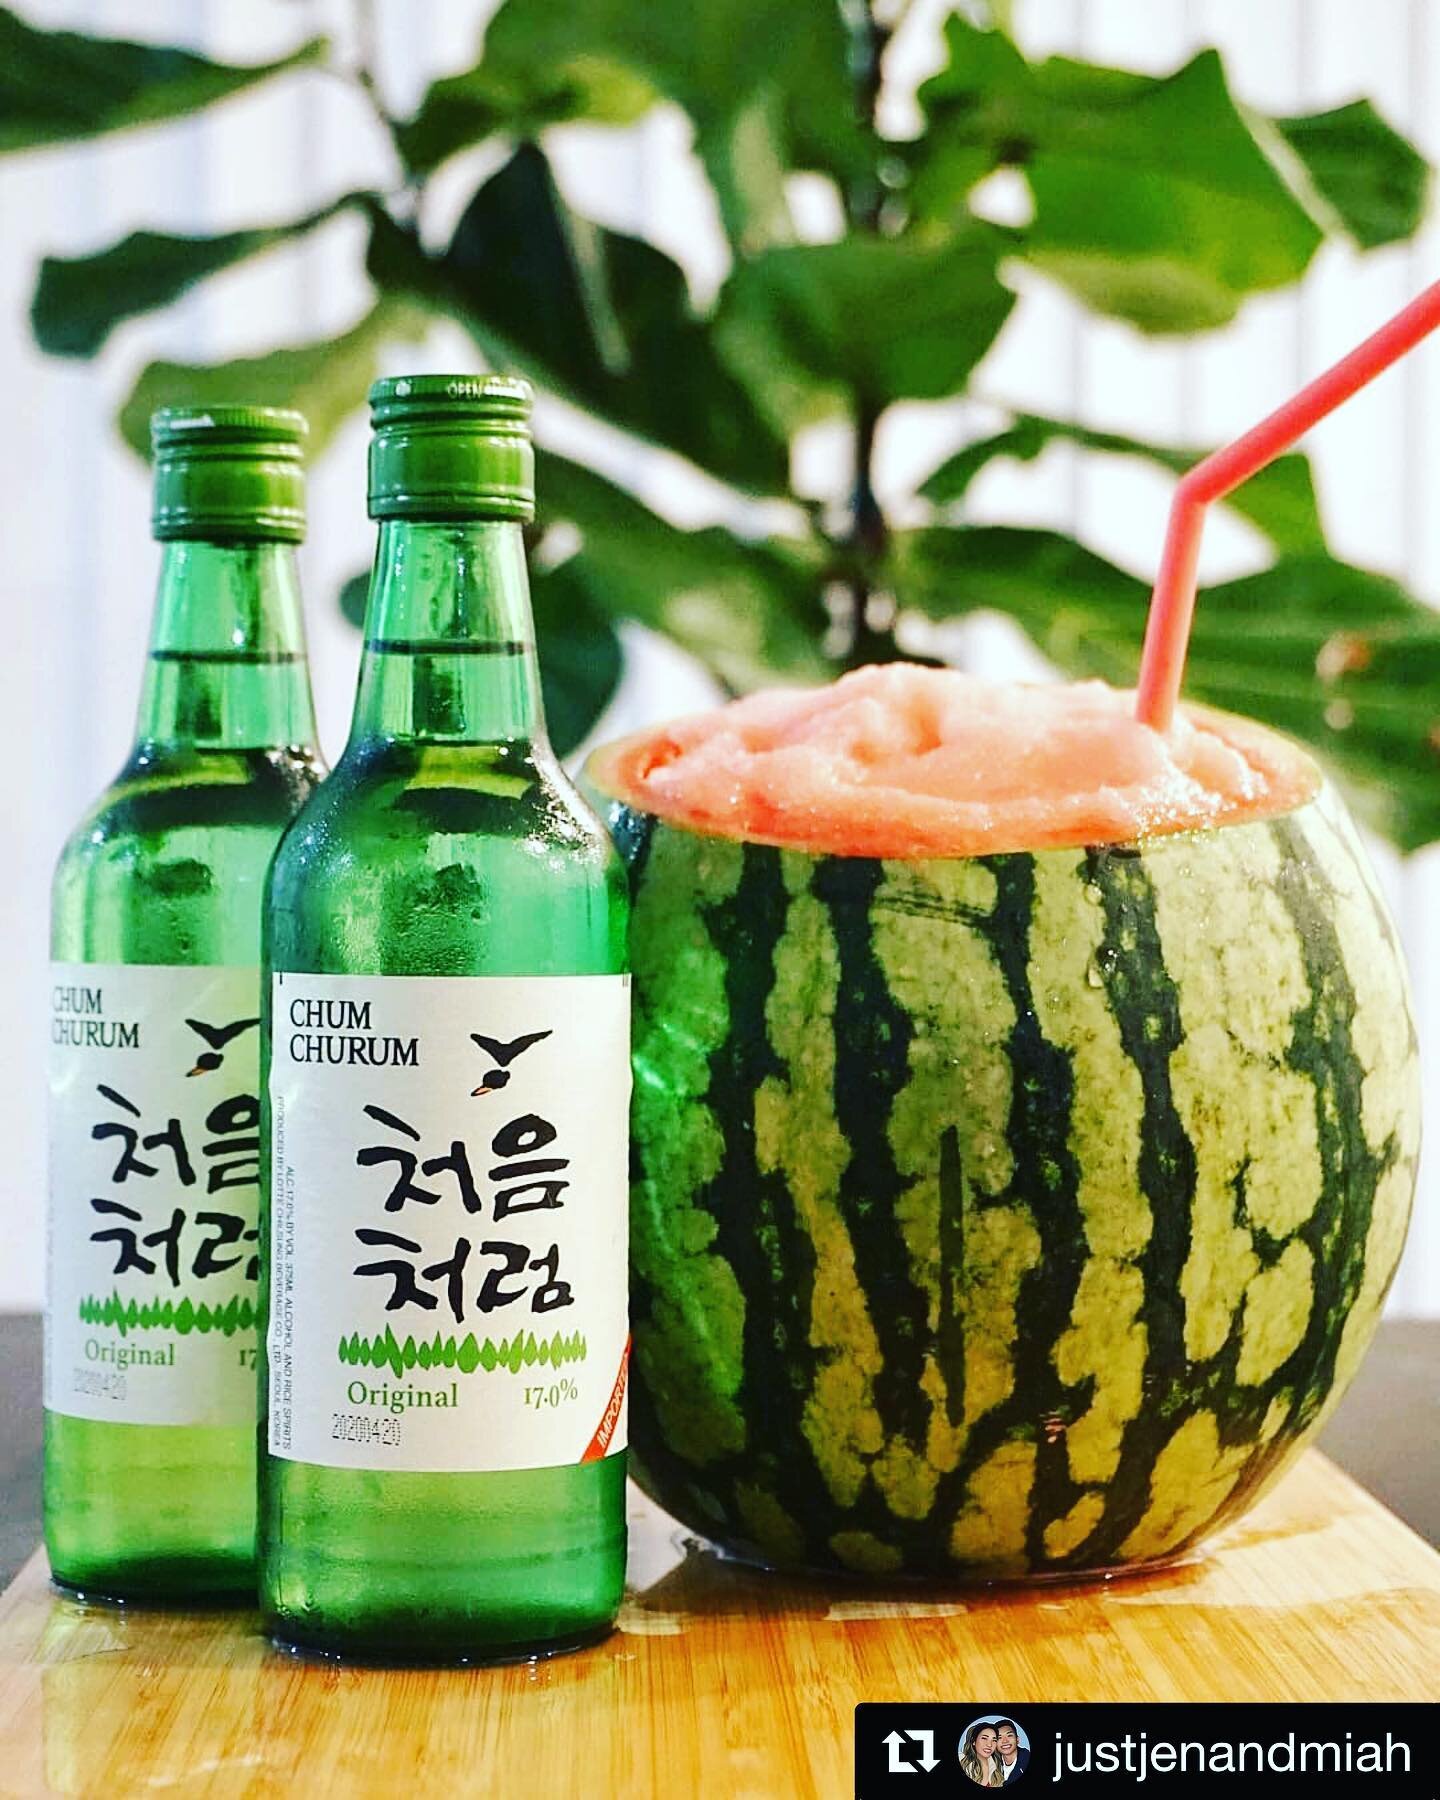 @justjenandmiah : 😎
&ldquo;Y'all 𝙠𝙣𝙤𝙬 we had to do a collab with @chumchurumus !🇰🇷&rdquo;

One of our 𝗙𝗔𝗩𝗢𝗥𝗜𝗧𝗘  drinks we like to make with soju is our 𝘄𝗮𝘁𝗲𝗿𝗺𝗲𝗹𝗼𝗻 𝘀𝗹𝘂𝘀𝗵𝗶𝗲 🍉😛 Had this for the first time in a Korean ba